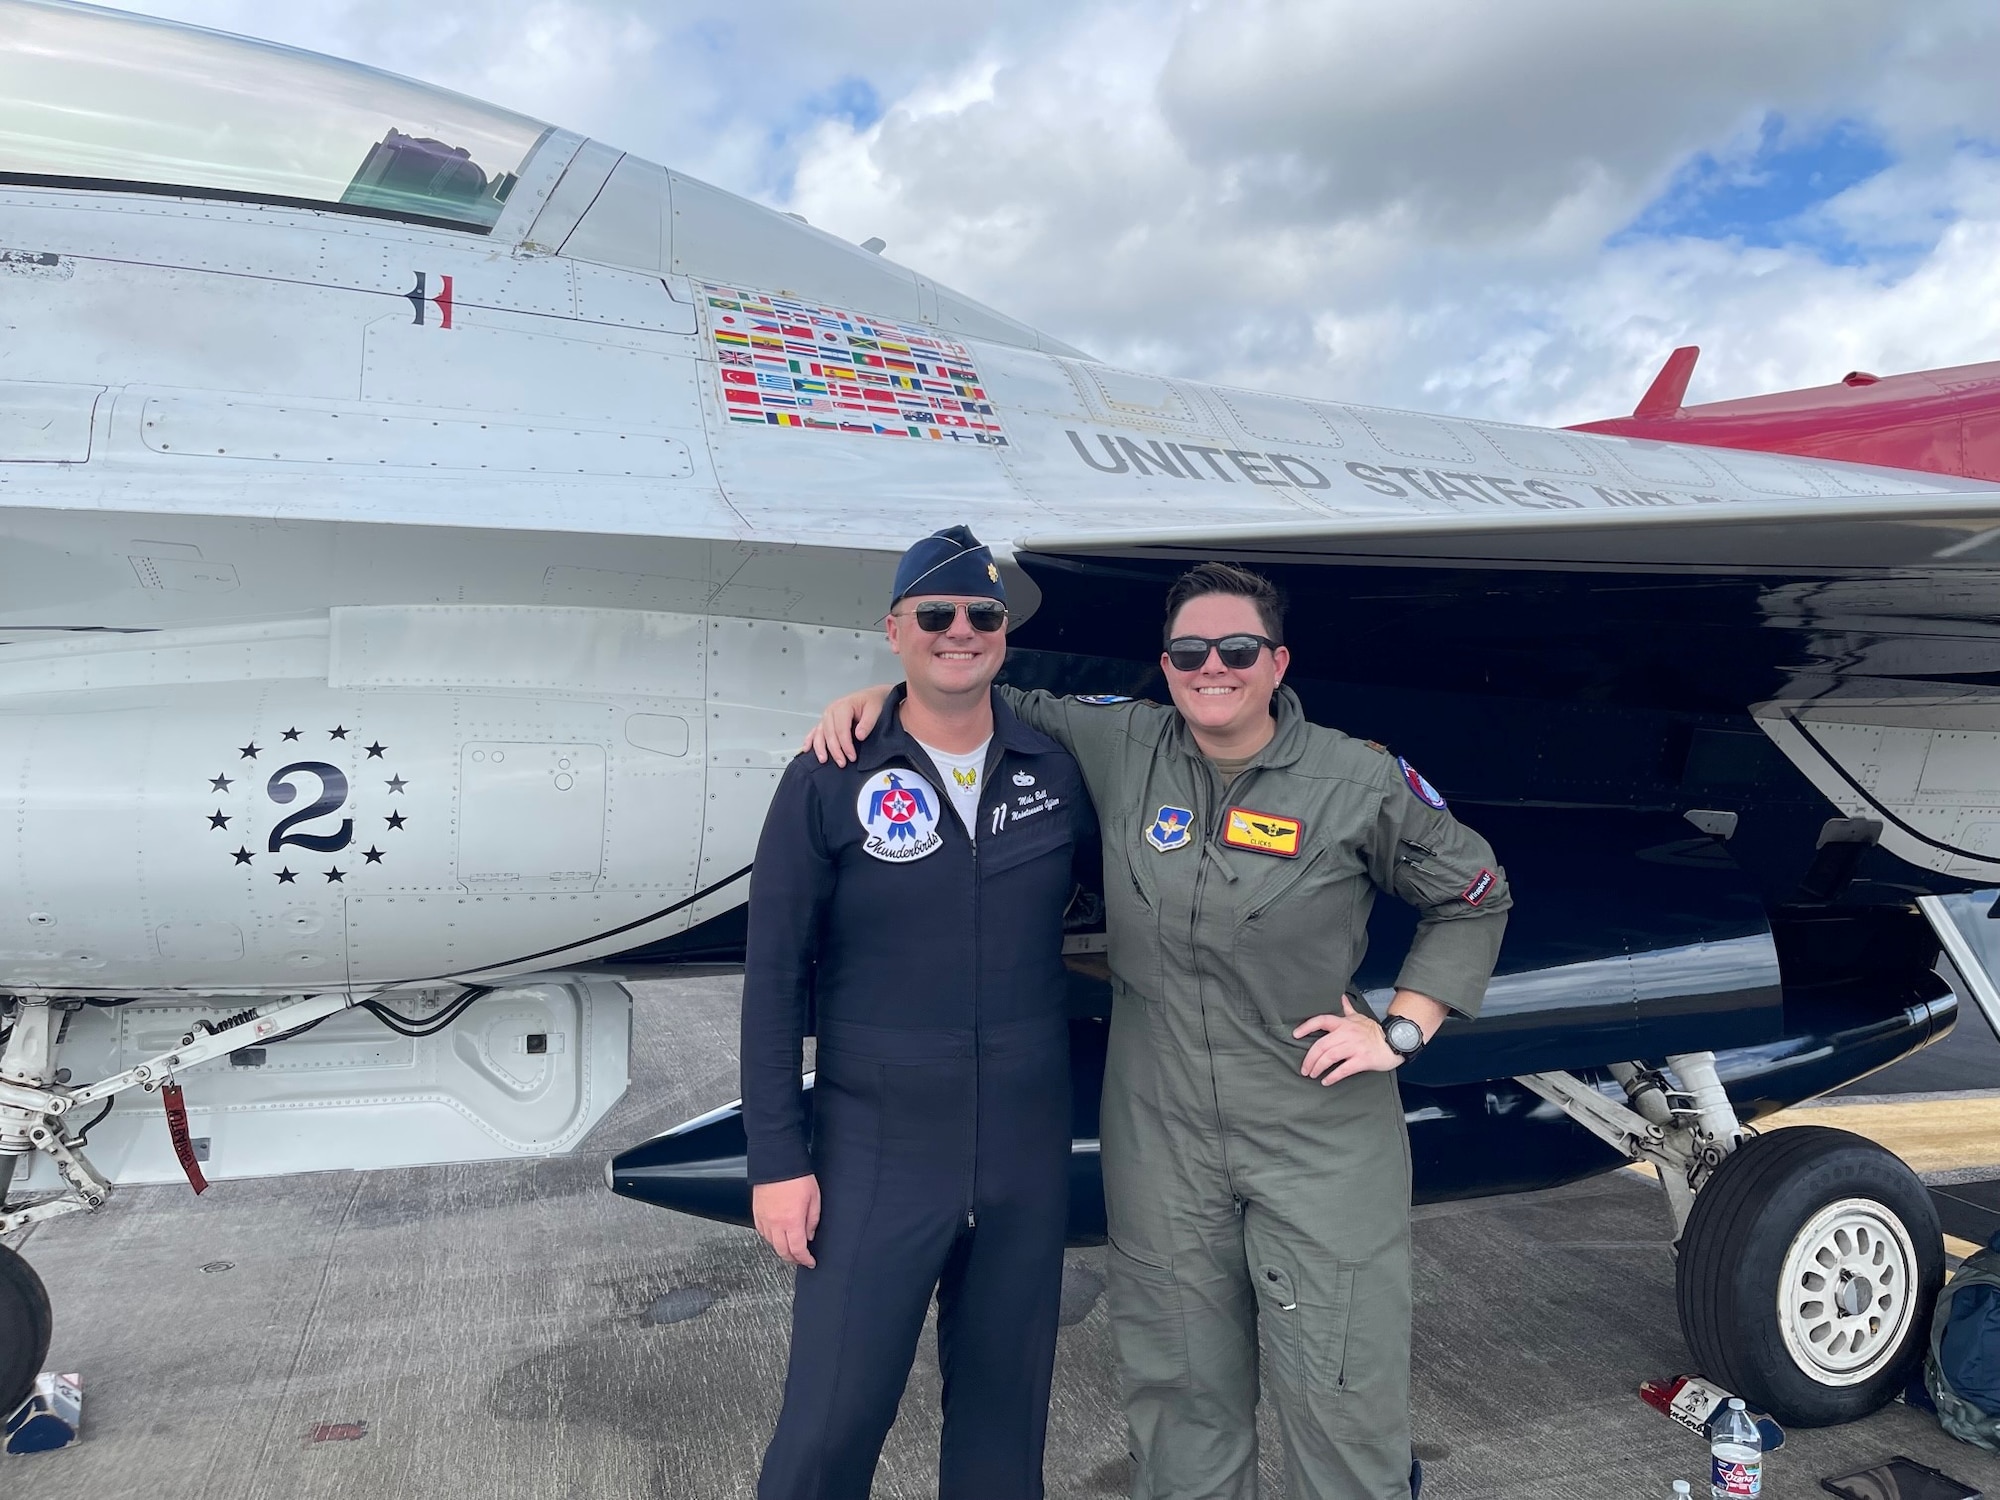 Maj. Kiersten “CLICKS” Thompson poses for a photo with her friend Maj. Mike Ball, a U.S. Air Force Thunderbird maintenance officer, at the Wings Over Houston Airshow in Houston, Texas, Oct. 10, 2021.